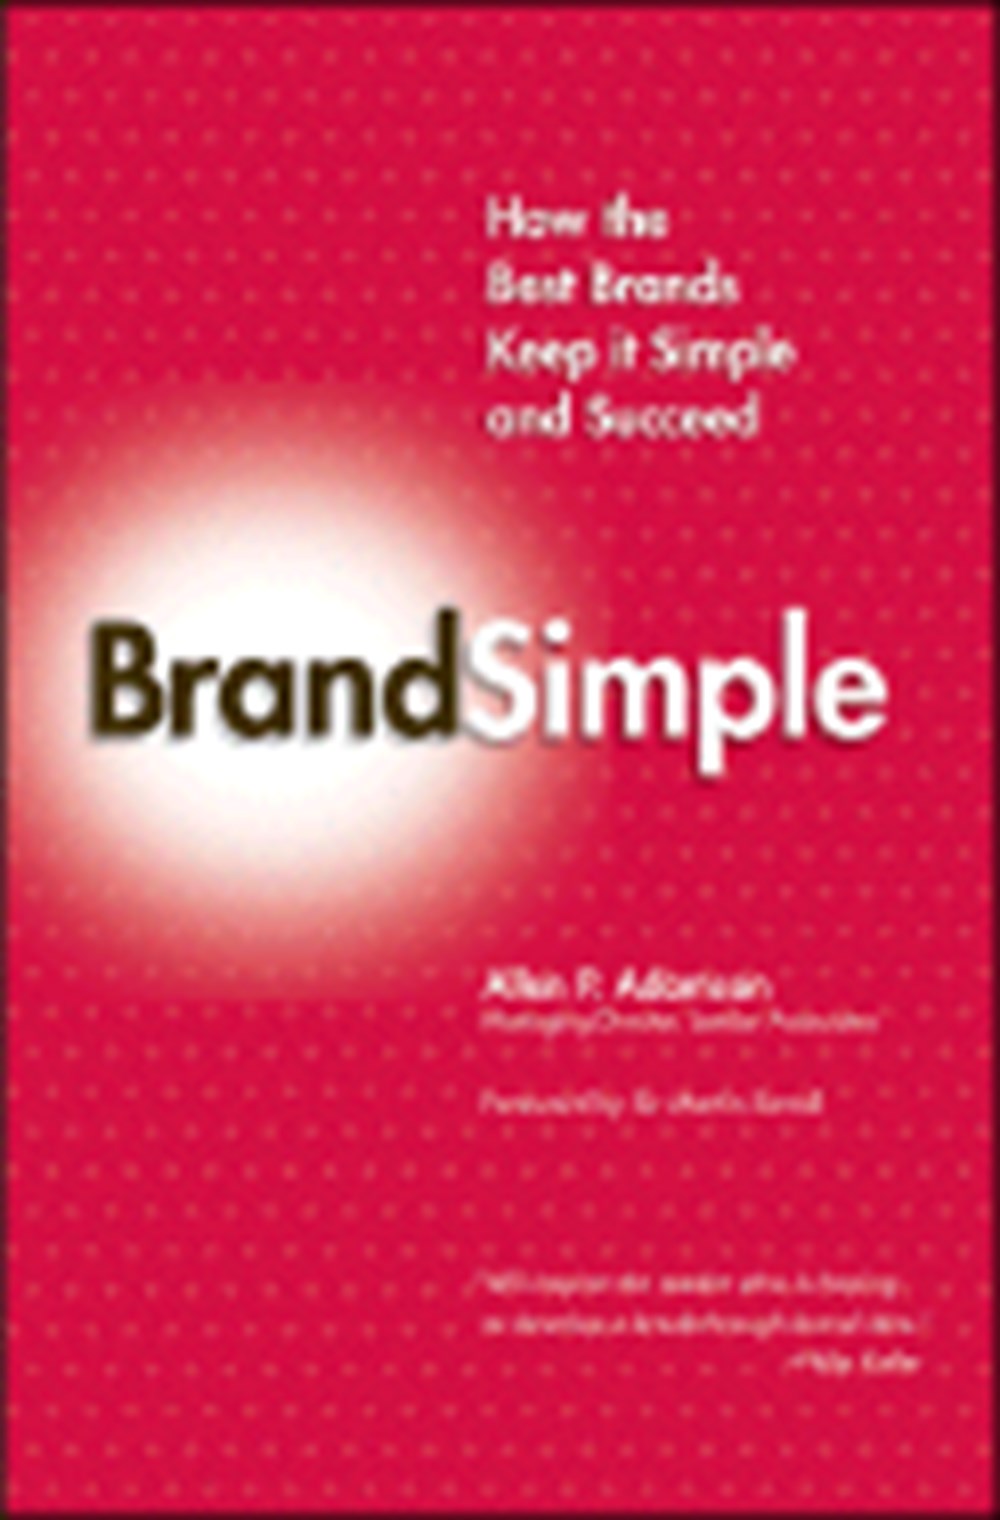 BrandSimple How the Best Brands Keep It Simple and Succeed